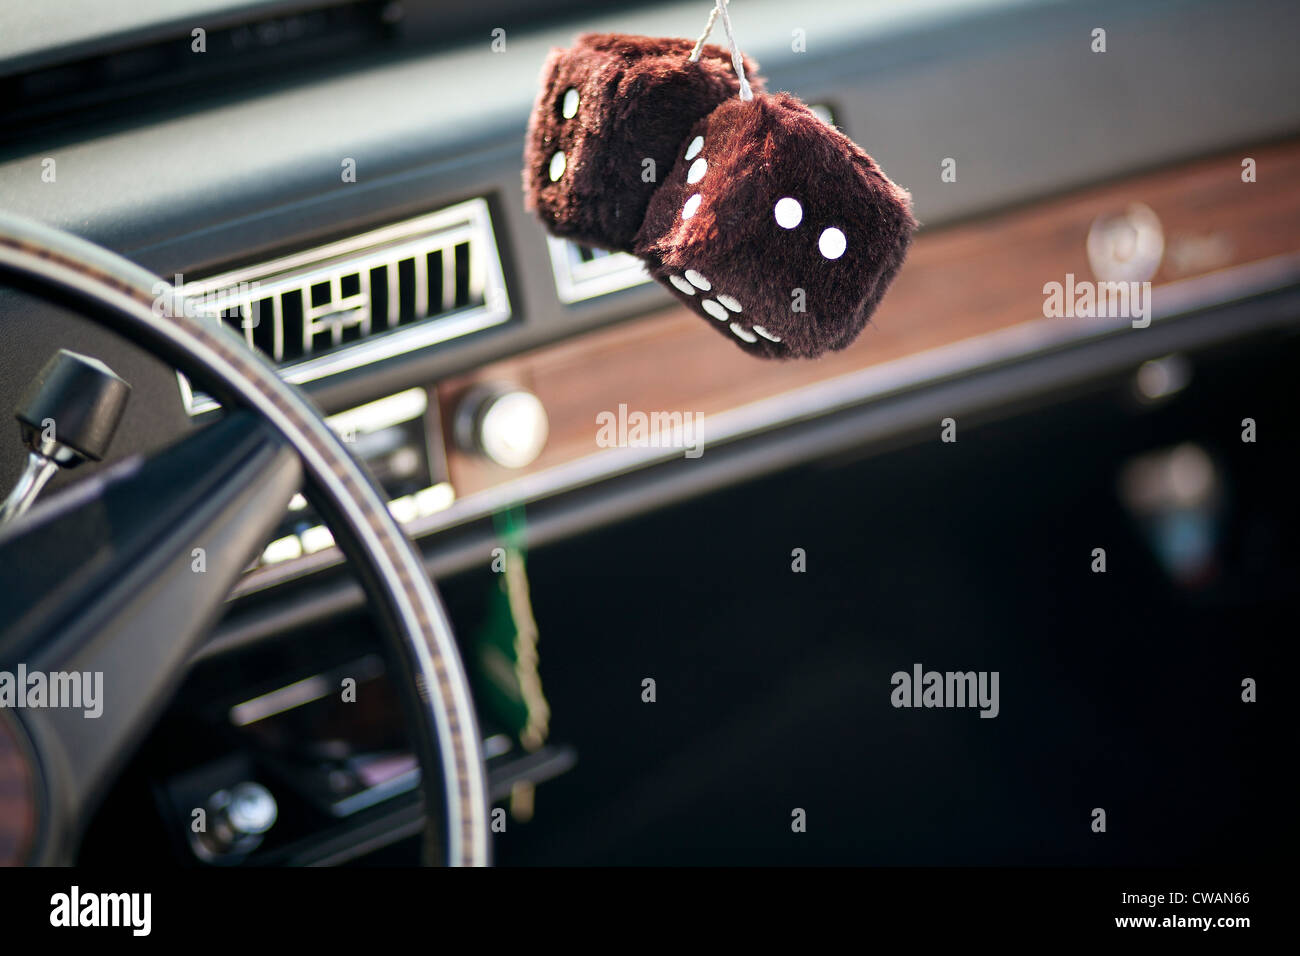 Furry dice hanging in car Stock Photo